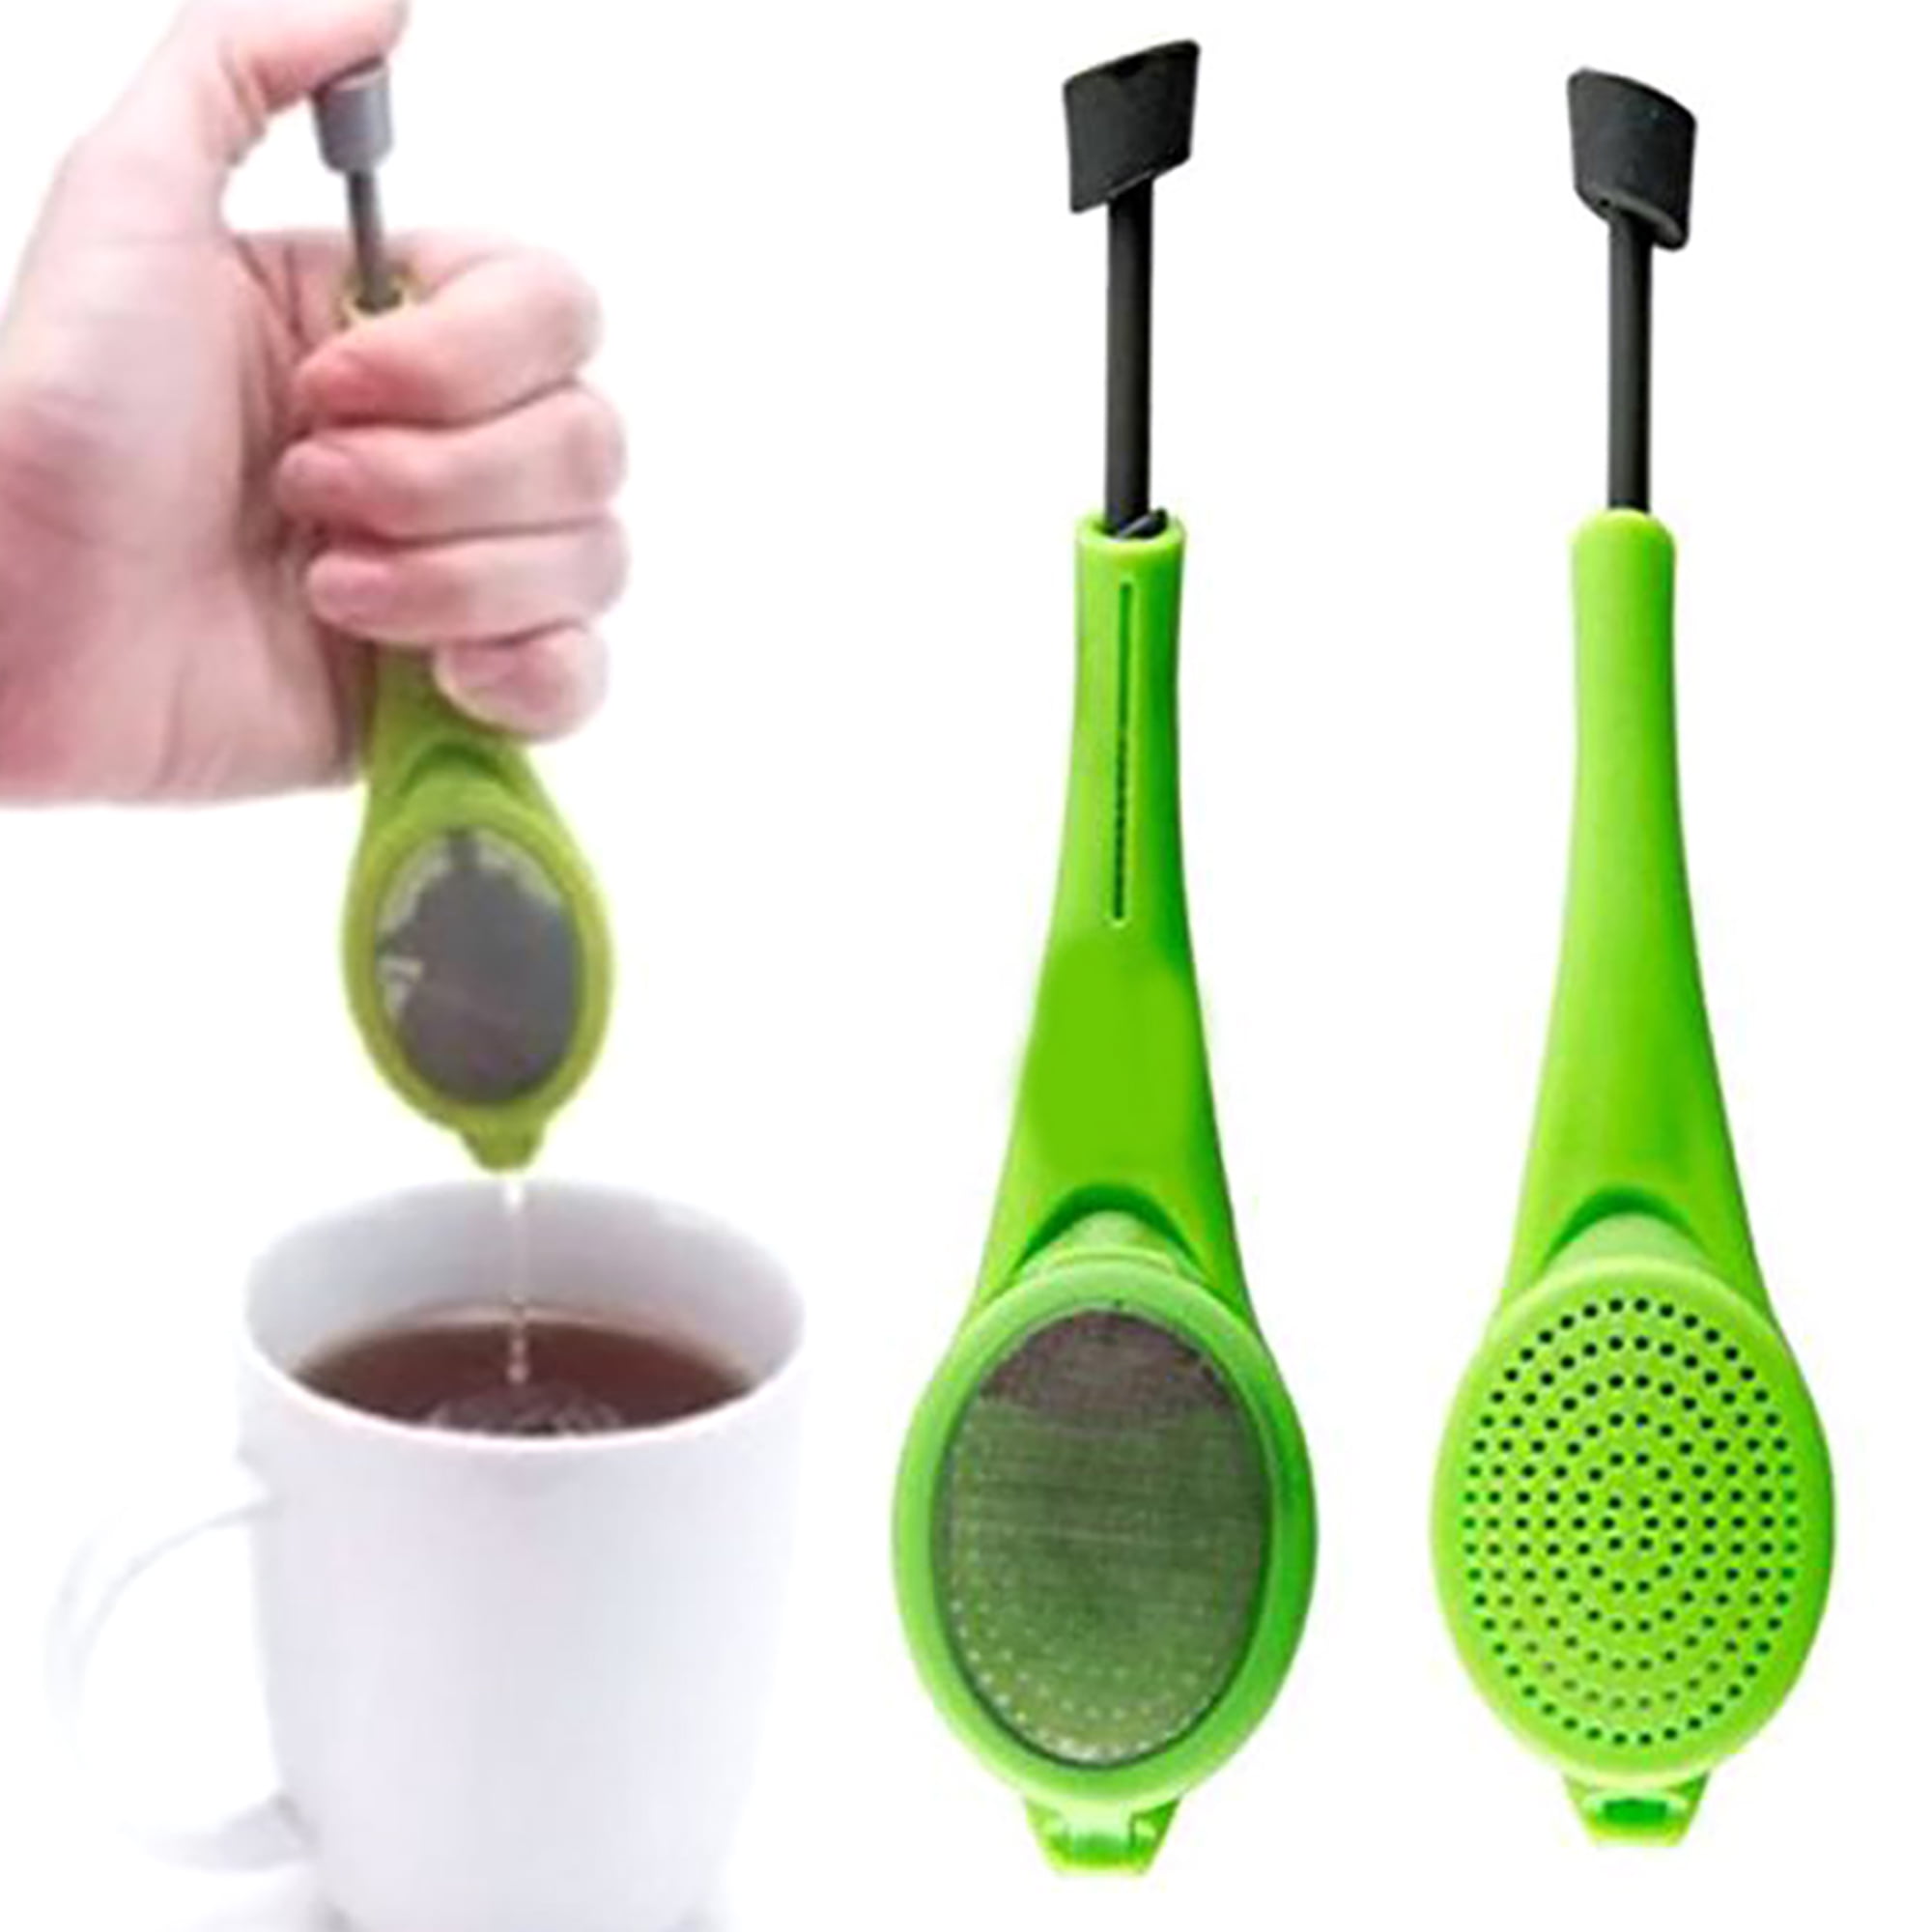 Tea Bags Strainers Silicone Filter Tea Infuser Teabags Tea Coffee Diffuser Tools 